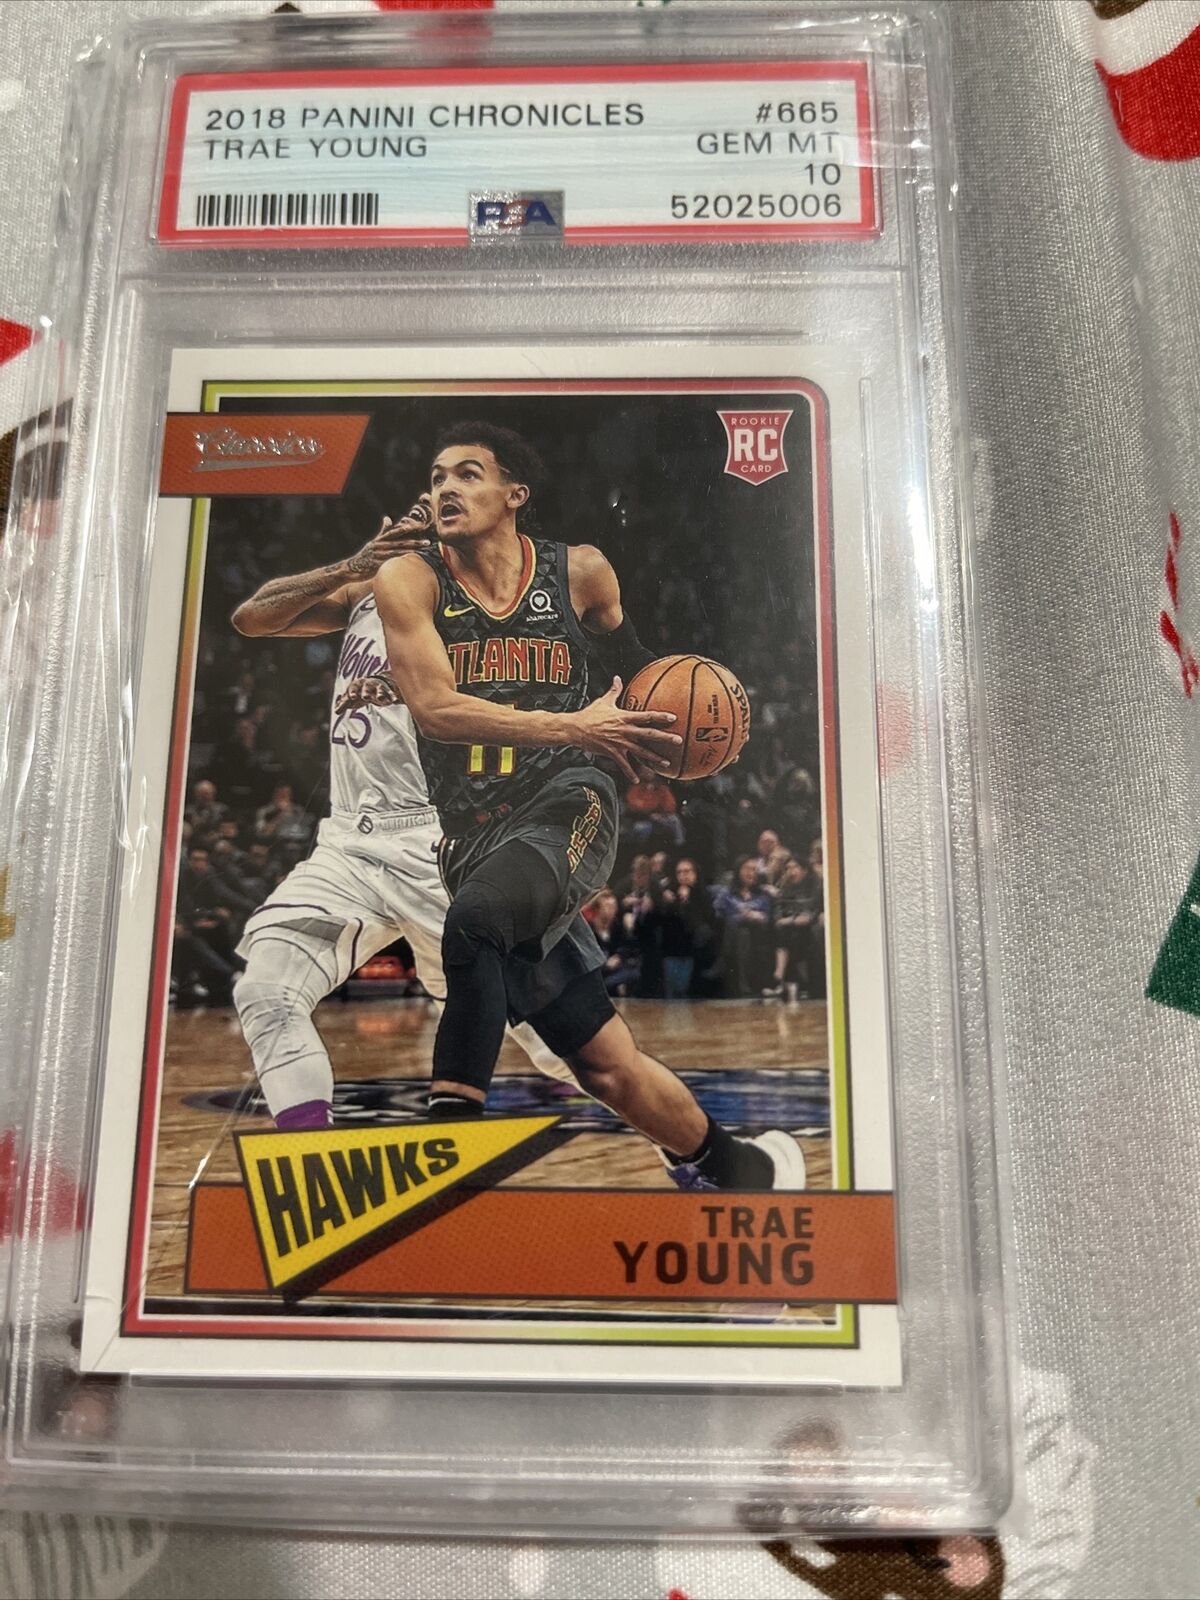 TRAE YOUNG (HAWKS) 2018 PANINI CHRONICLES #665 RC PSA 10 (GEM MINT) ROOKIE